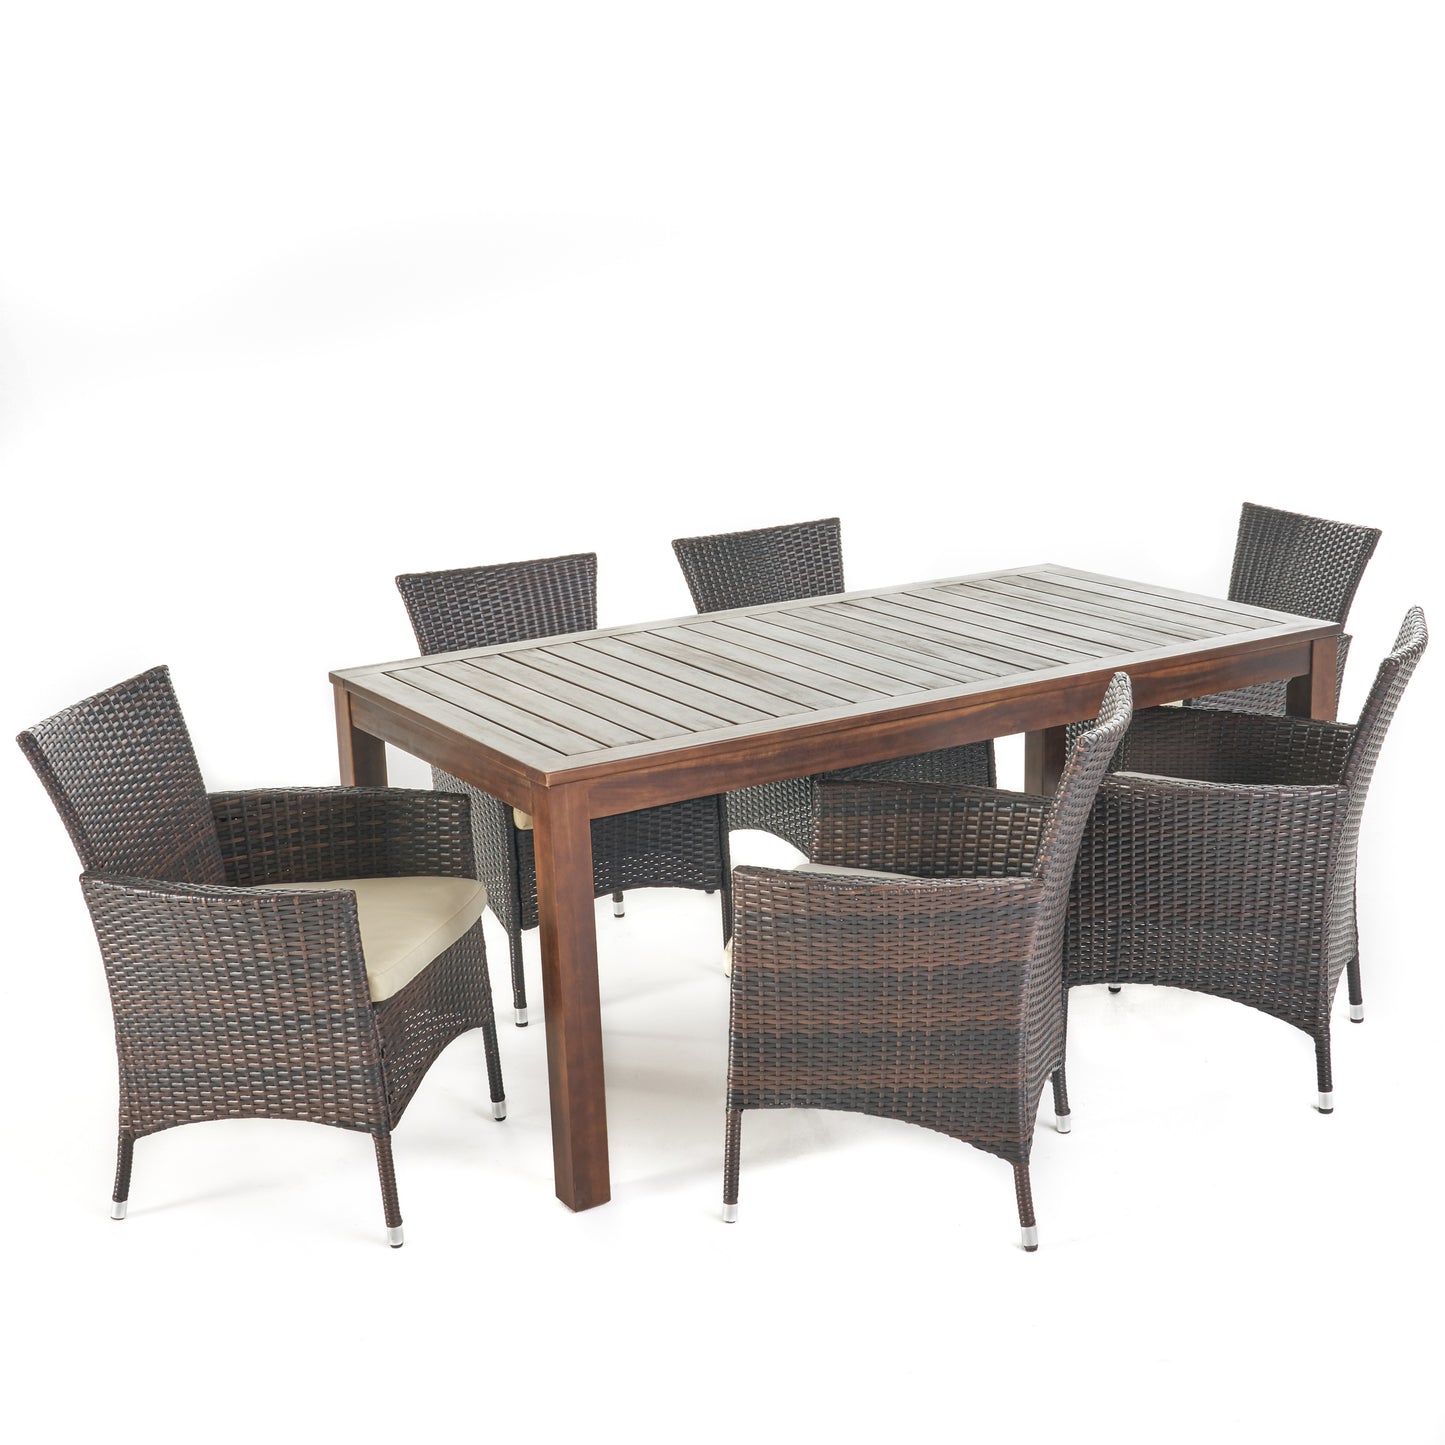 Taft 6 Persons Wood & Wicker Outdoor Dining Set